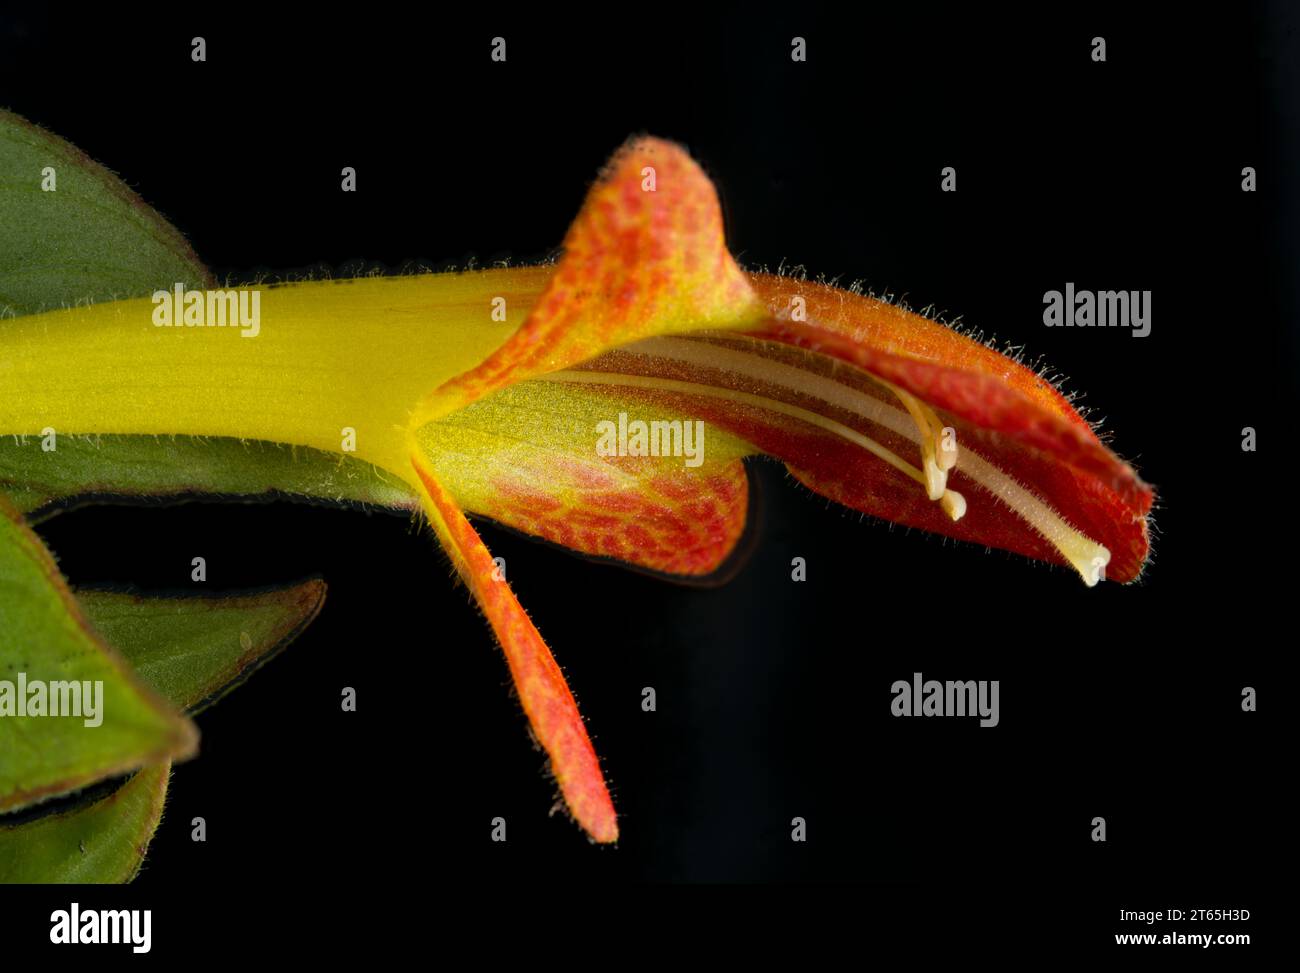 Closeup of a single flower from a goldfish plant (Columnea gloriosa) against a black background. Stock Photo